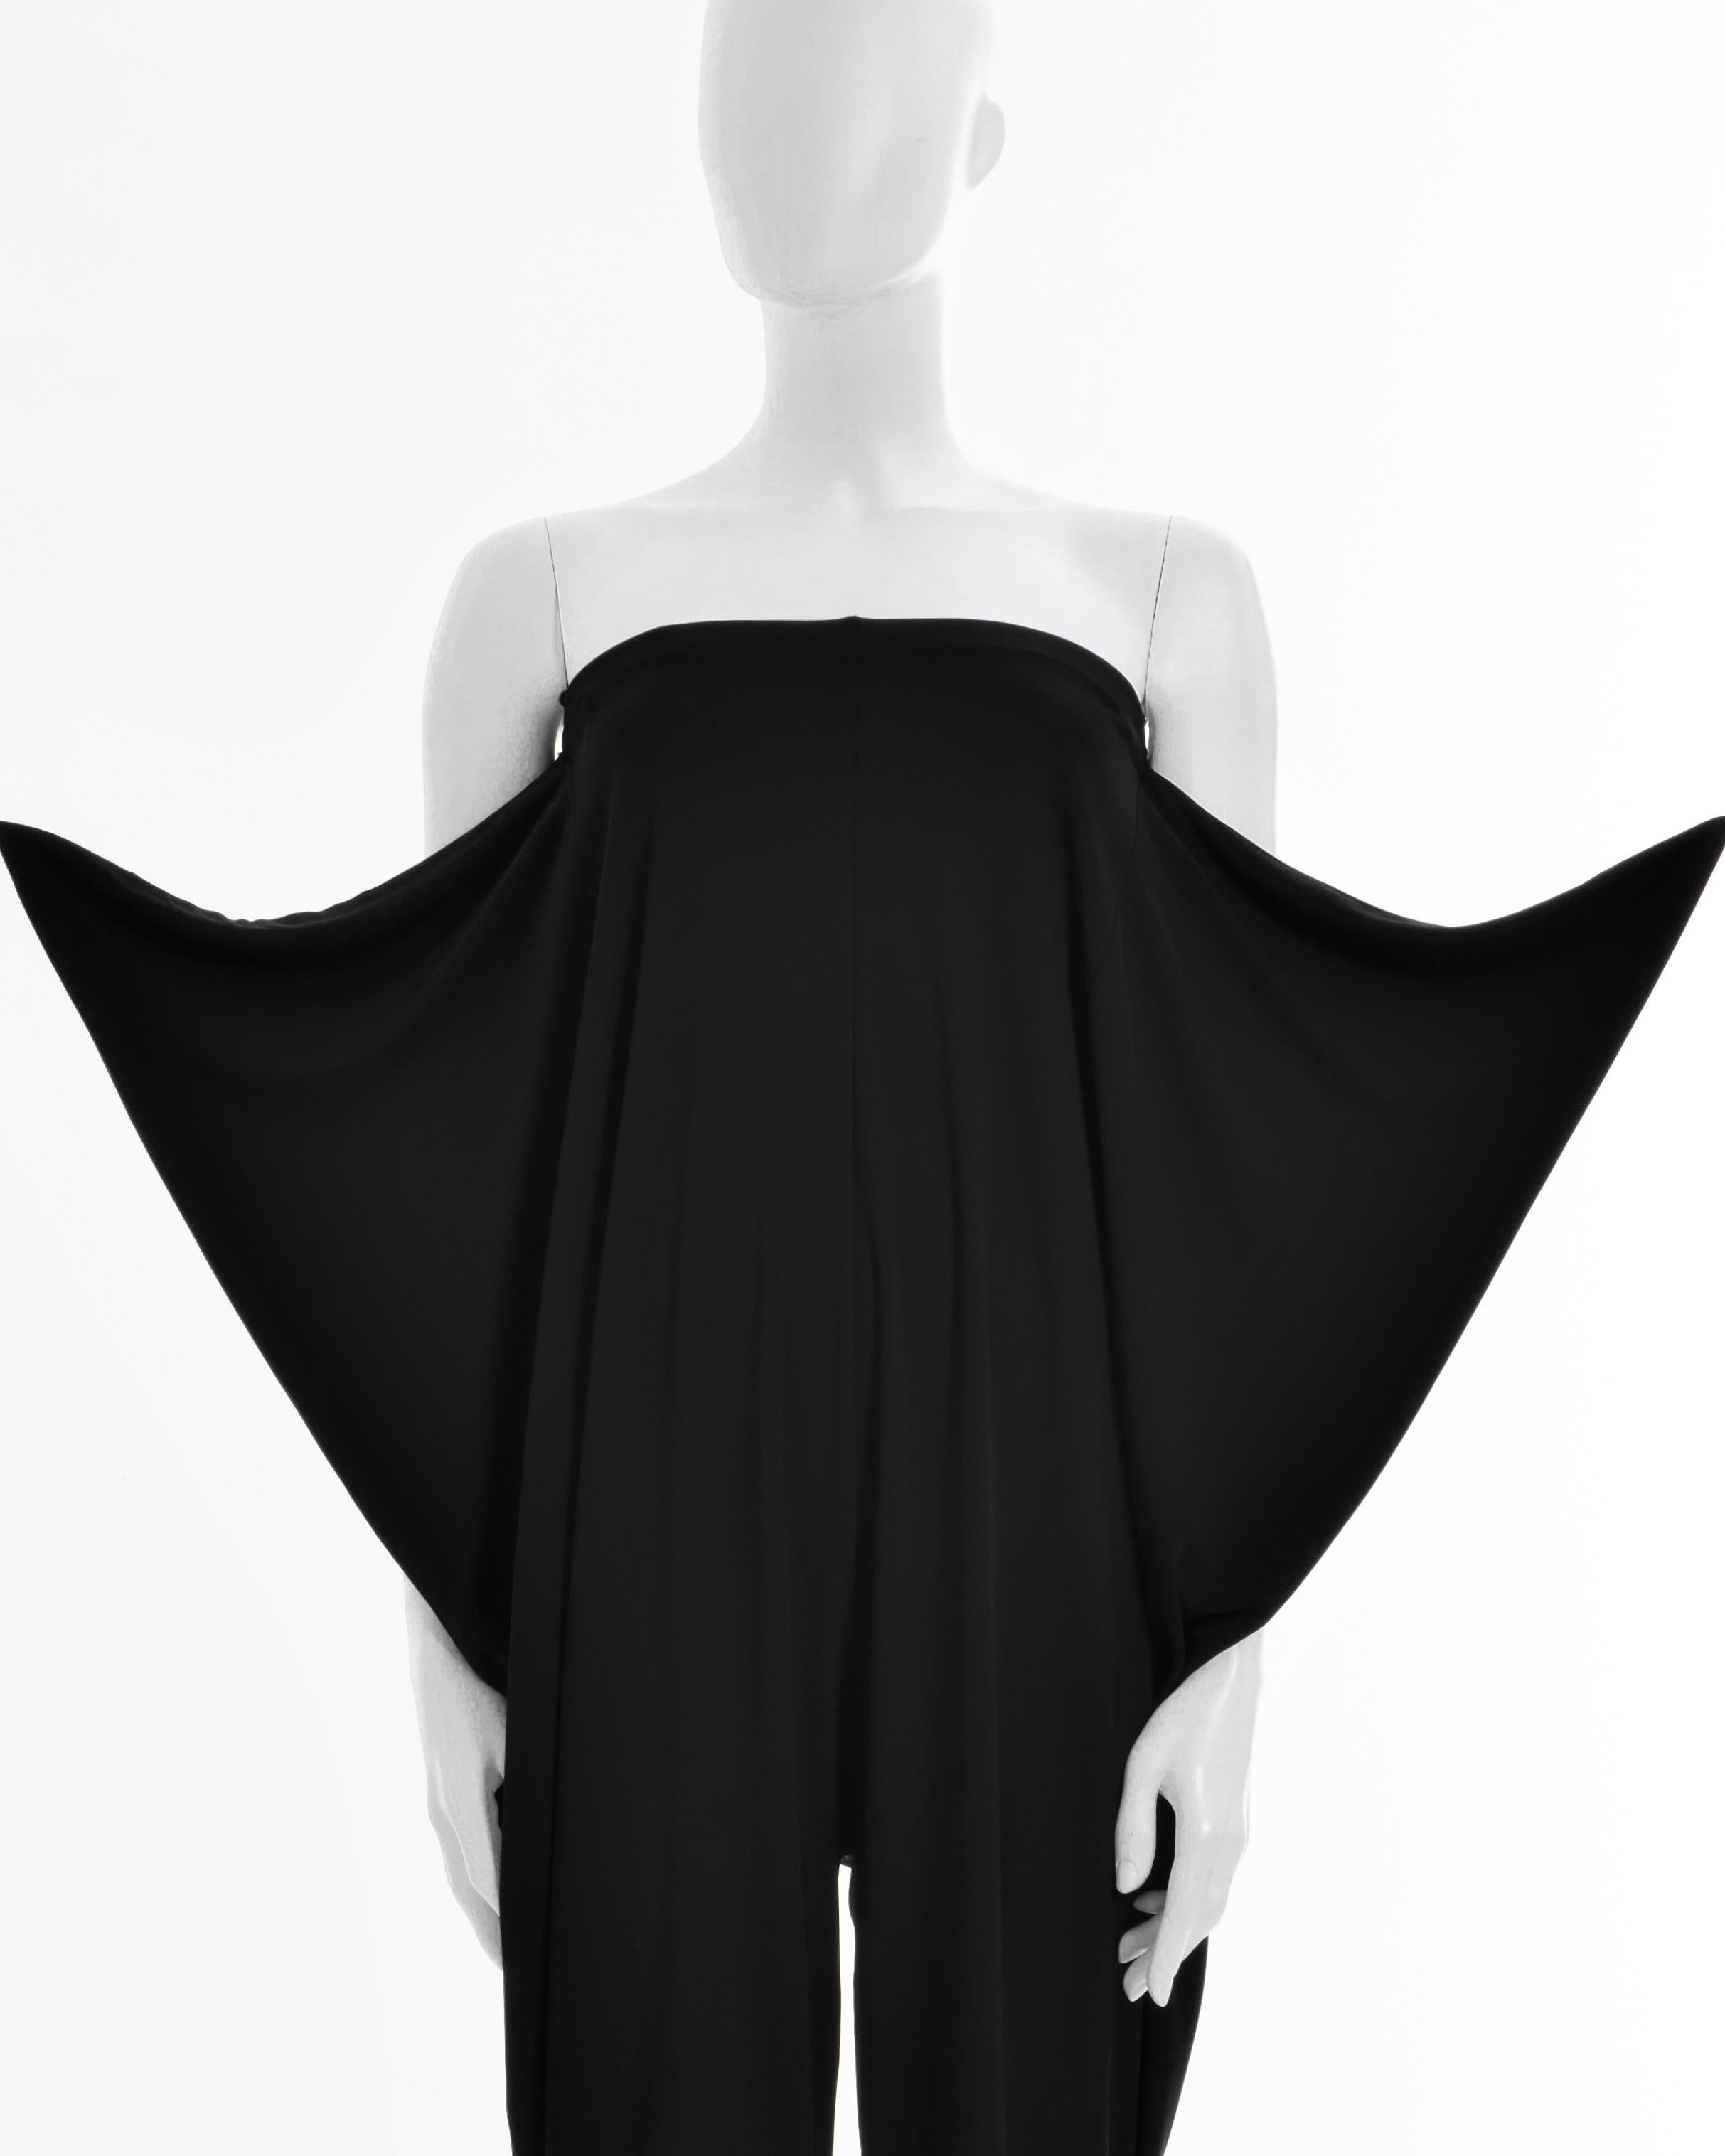 - Maison Martin Margiela black viscose jumpsuit
- Sold by Skof.Archive 
- Shoulders off 
- Adjustable panels on the back 
- Silicon bust line
- Size: FR 36 - IT 40 - UK 8 - US 4 (EU) 
- Fabric: 100% Viscose
- Made in Italy
- Mint Conditions